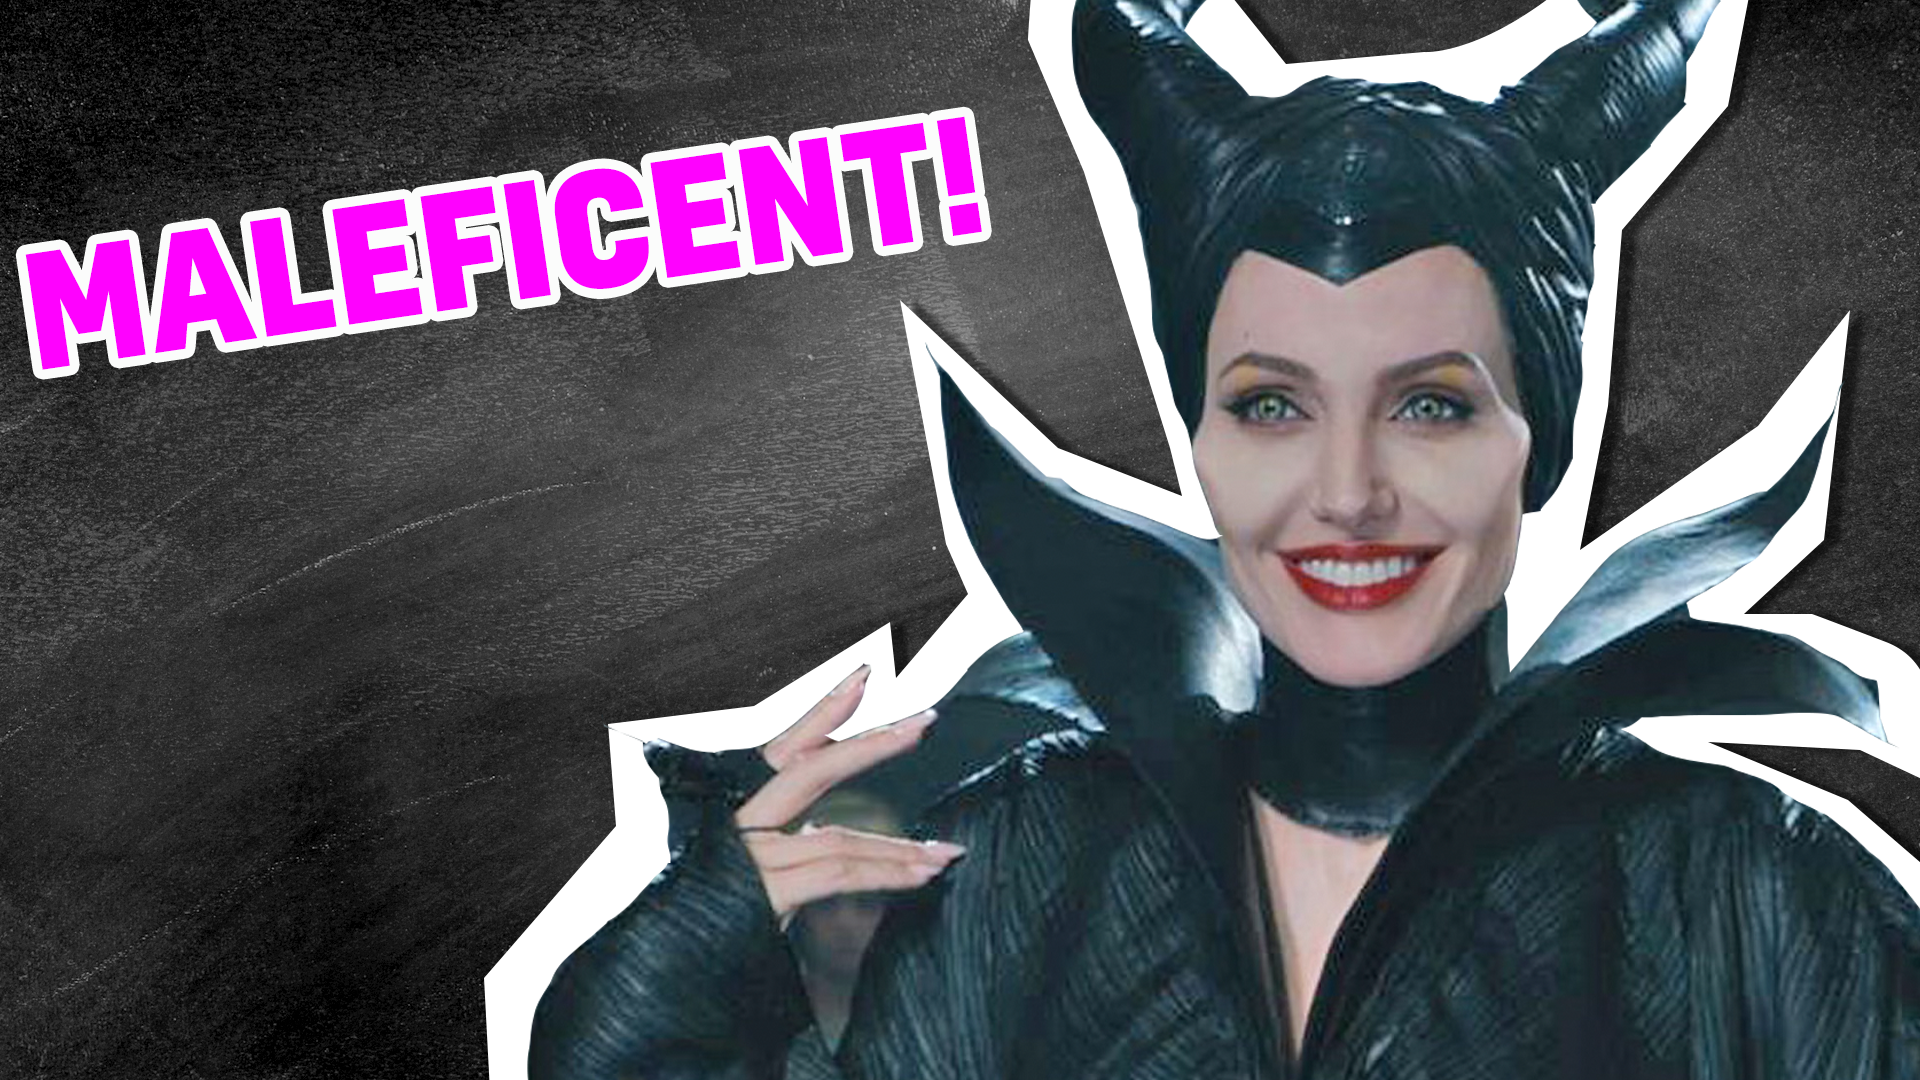 You're just like Maleficent! You may seem a bit intimidating, but underneath that gothic exterior, you've got a good heart and you really care about people! But it's best not to make you mad!